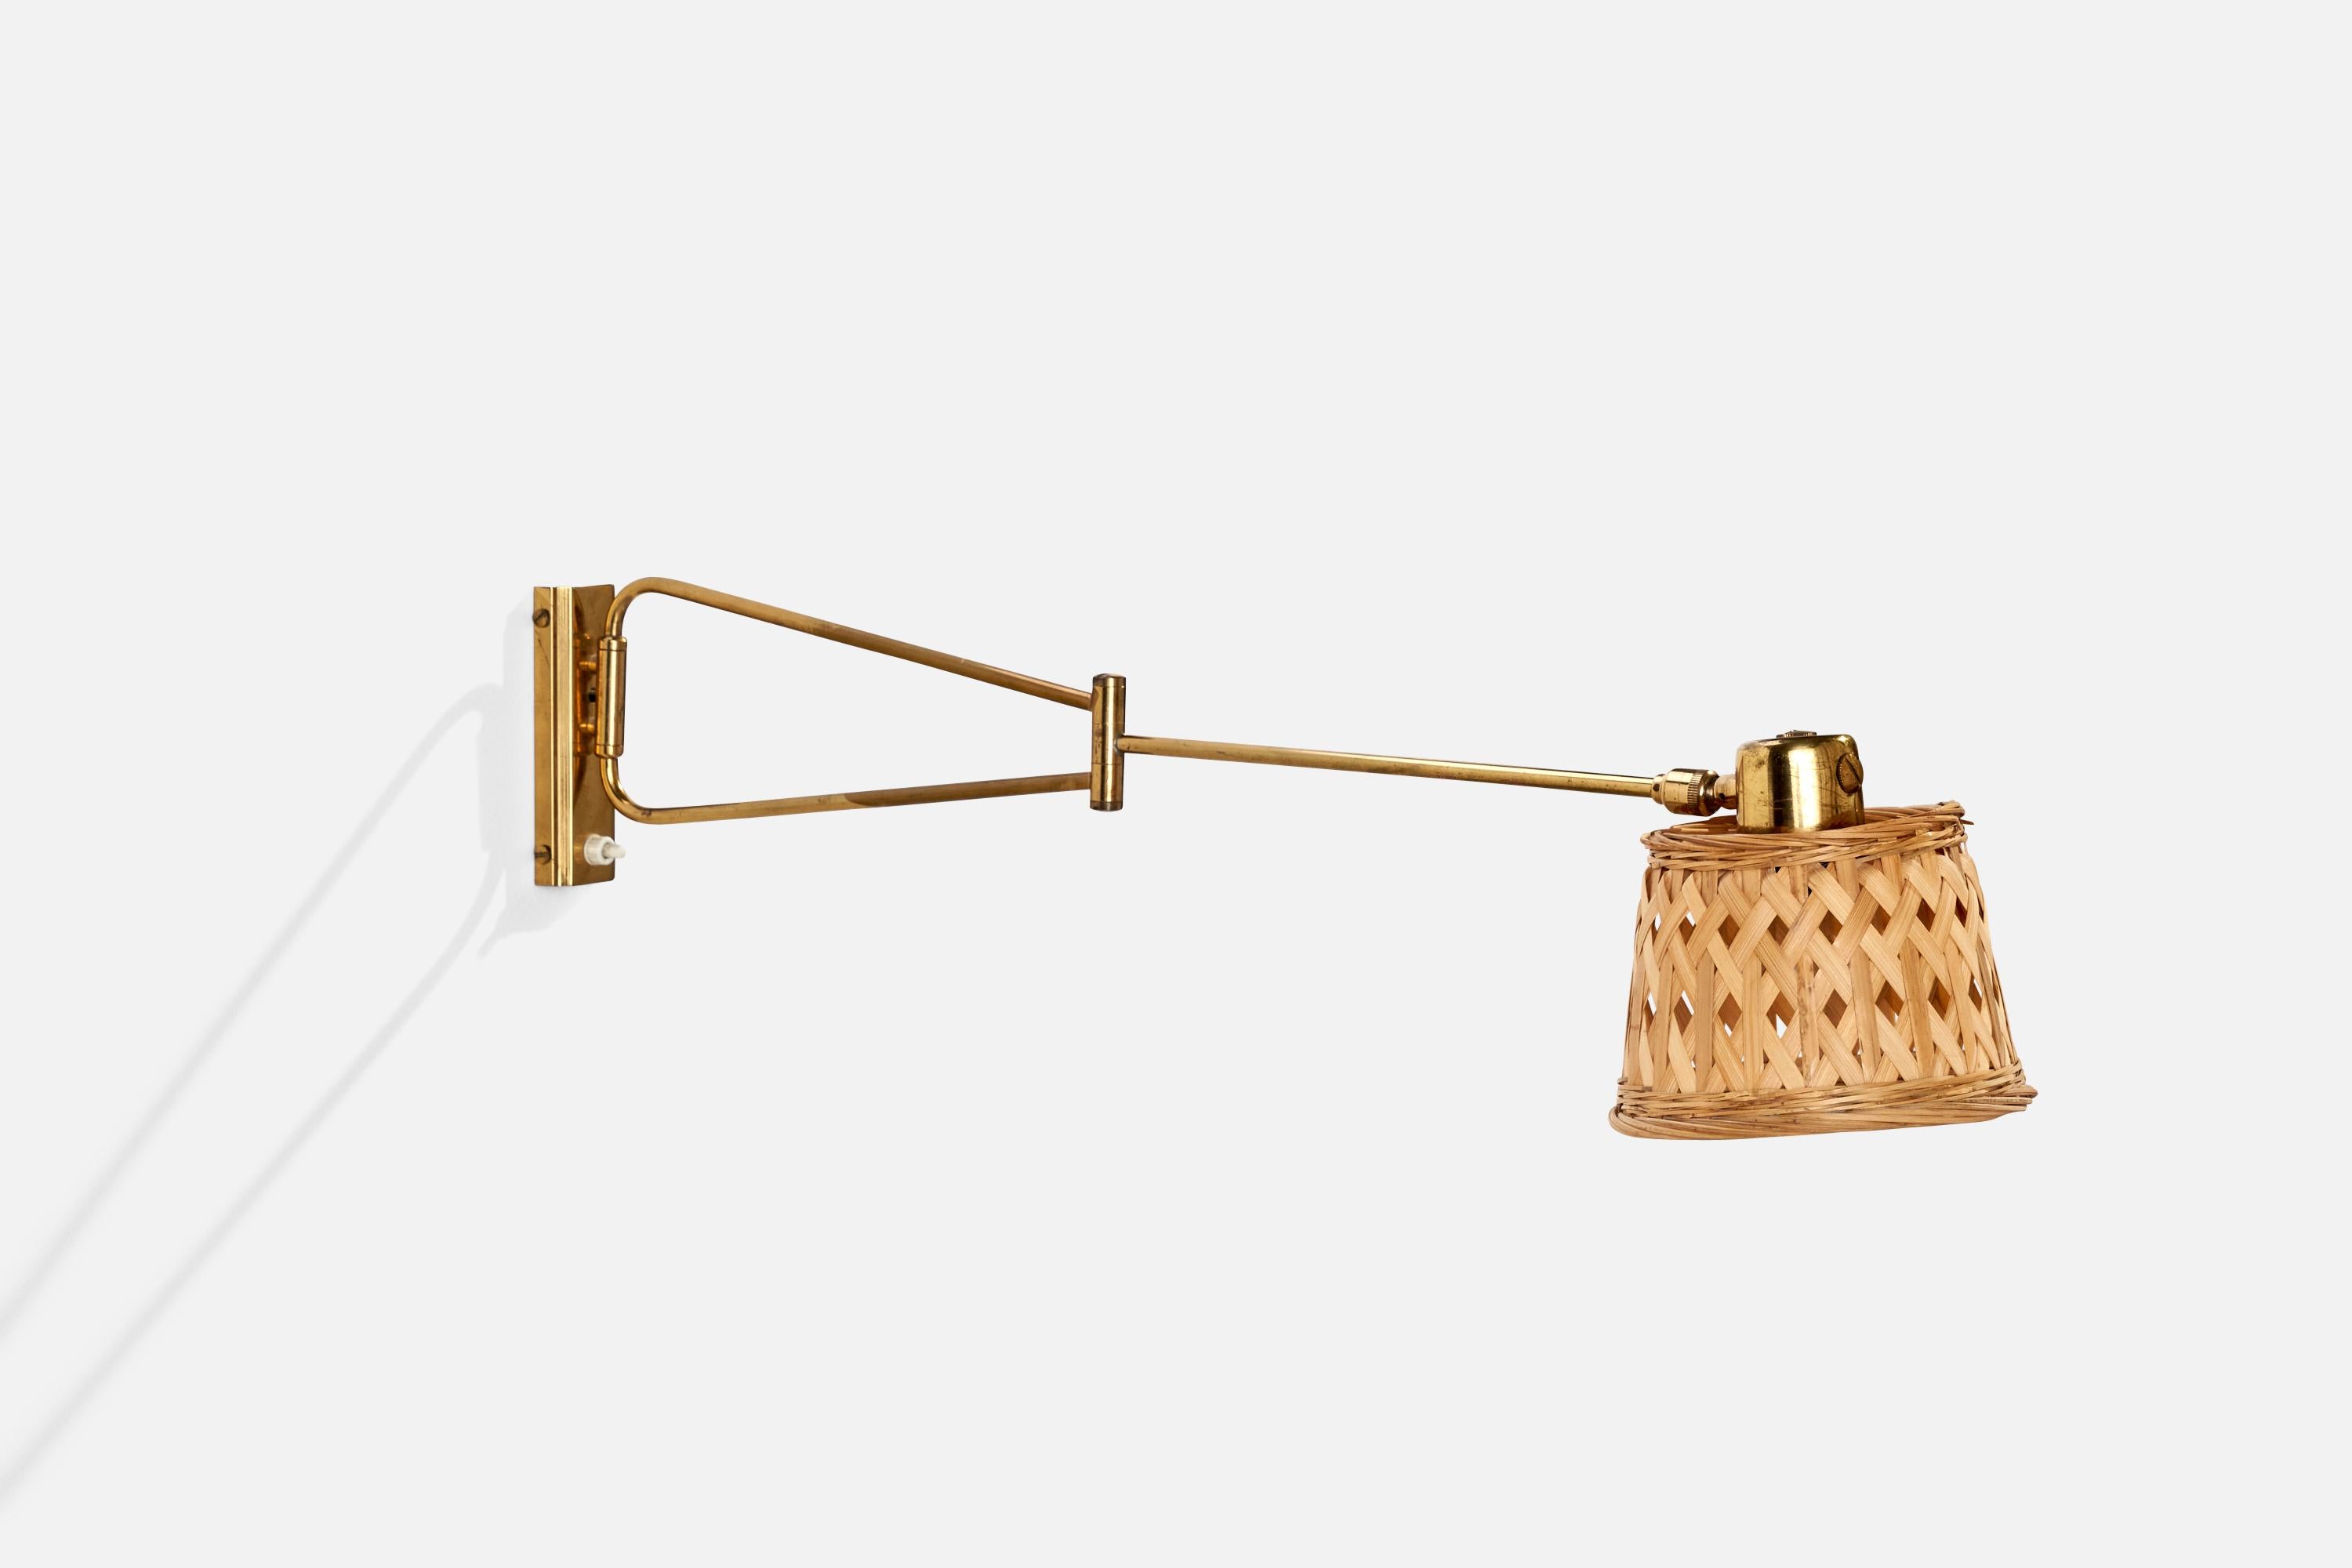 An adjustable brass and rattan wall light designed by Rene Mathieu and produced by Lunel, France, 1950s.

Overall Dimensions (inches): 6